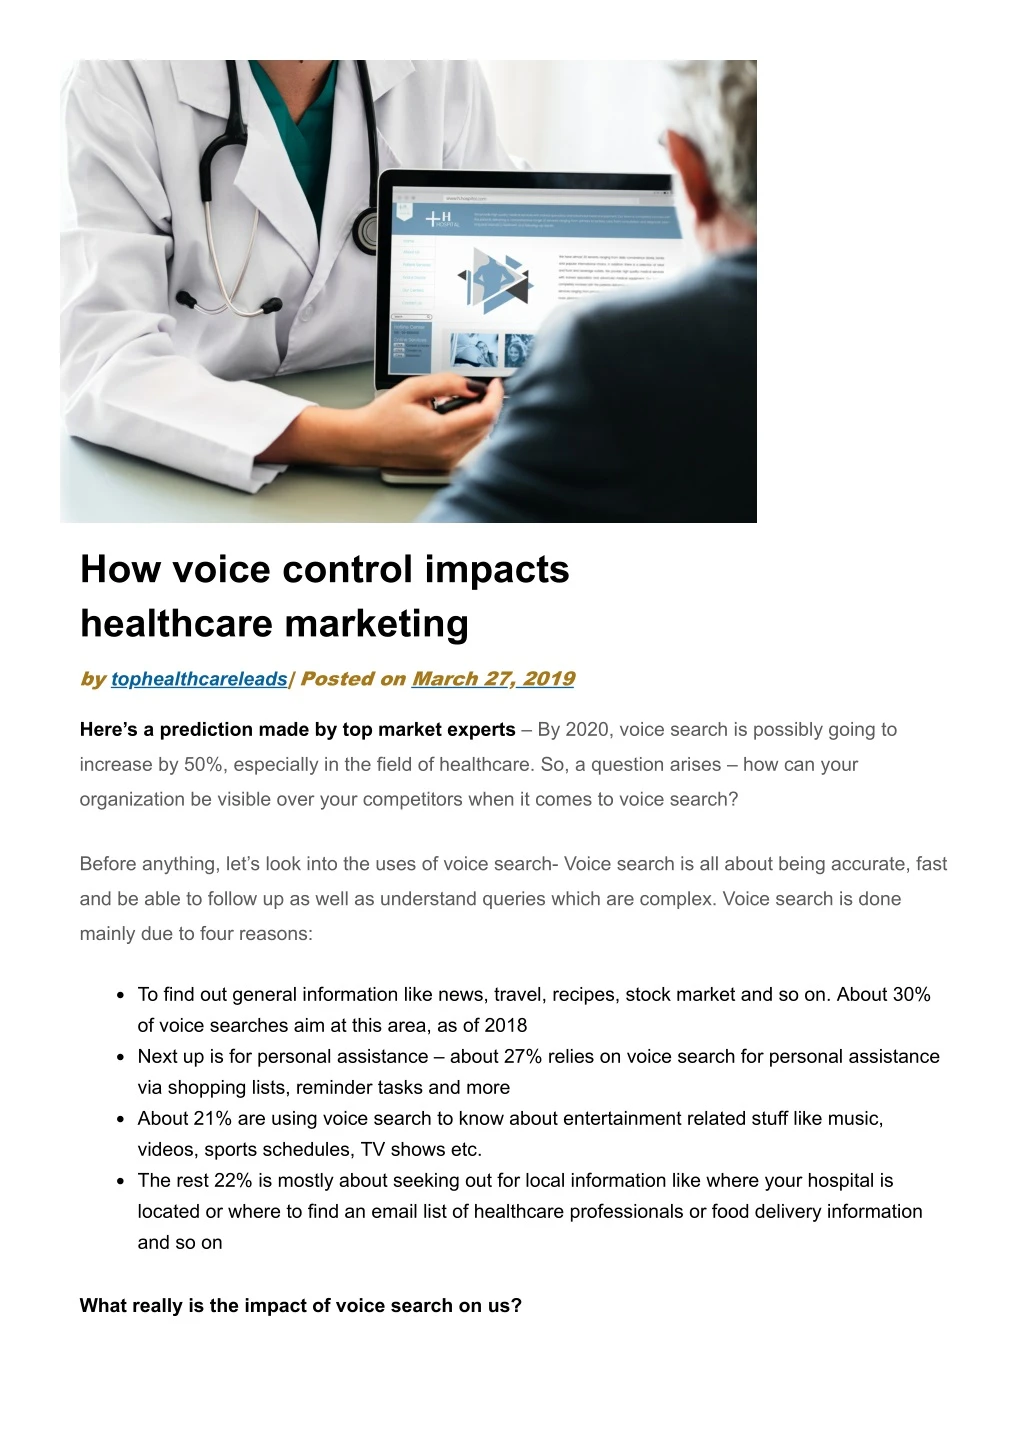 how voice control impacts healthcare marketing